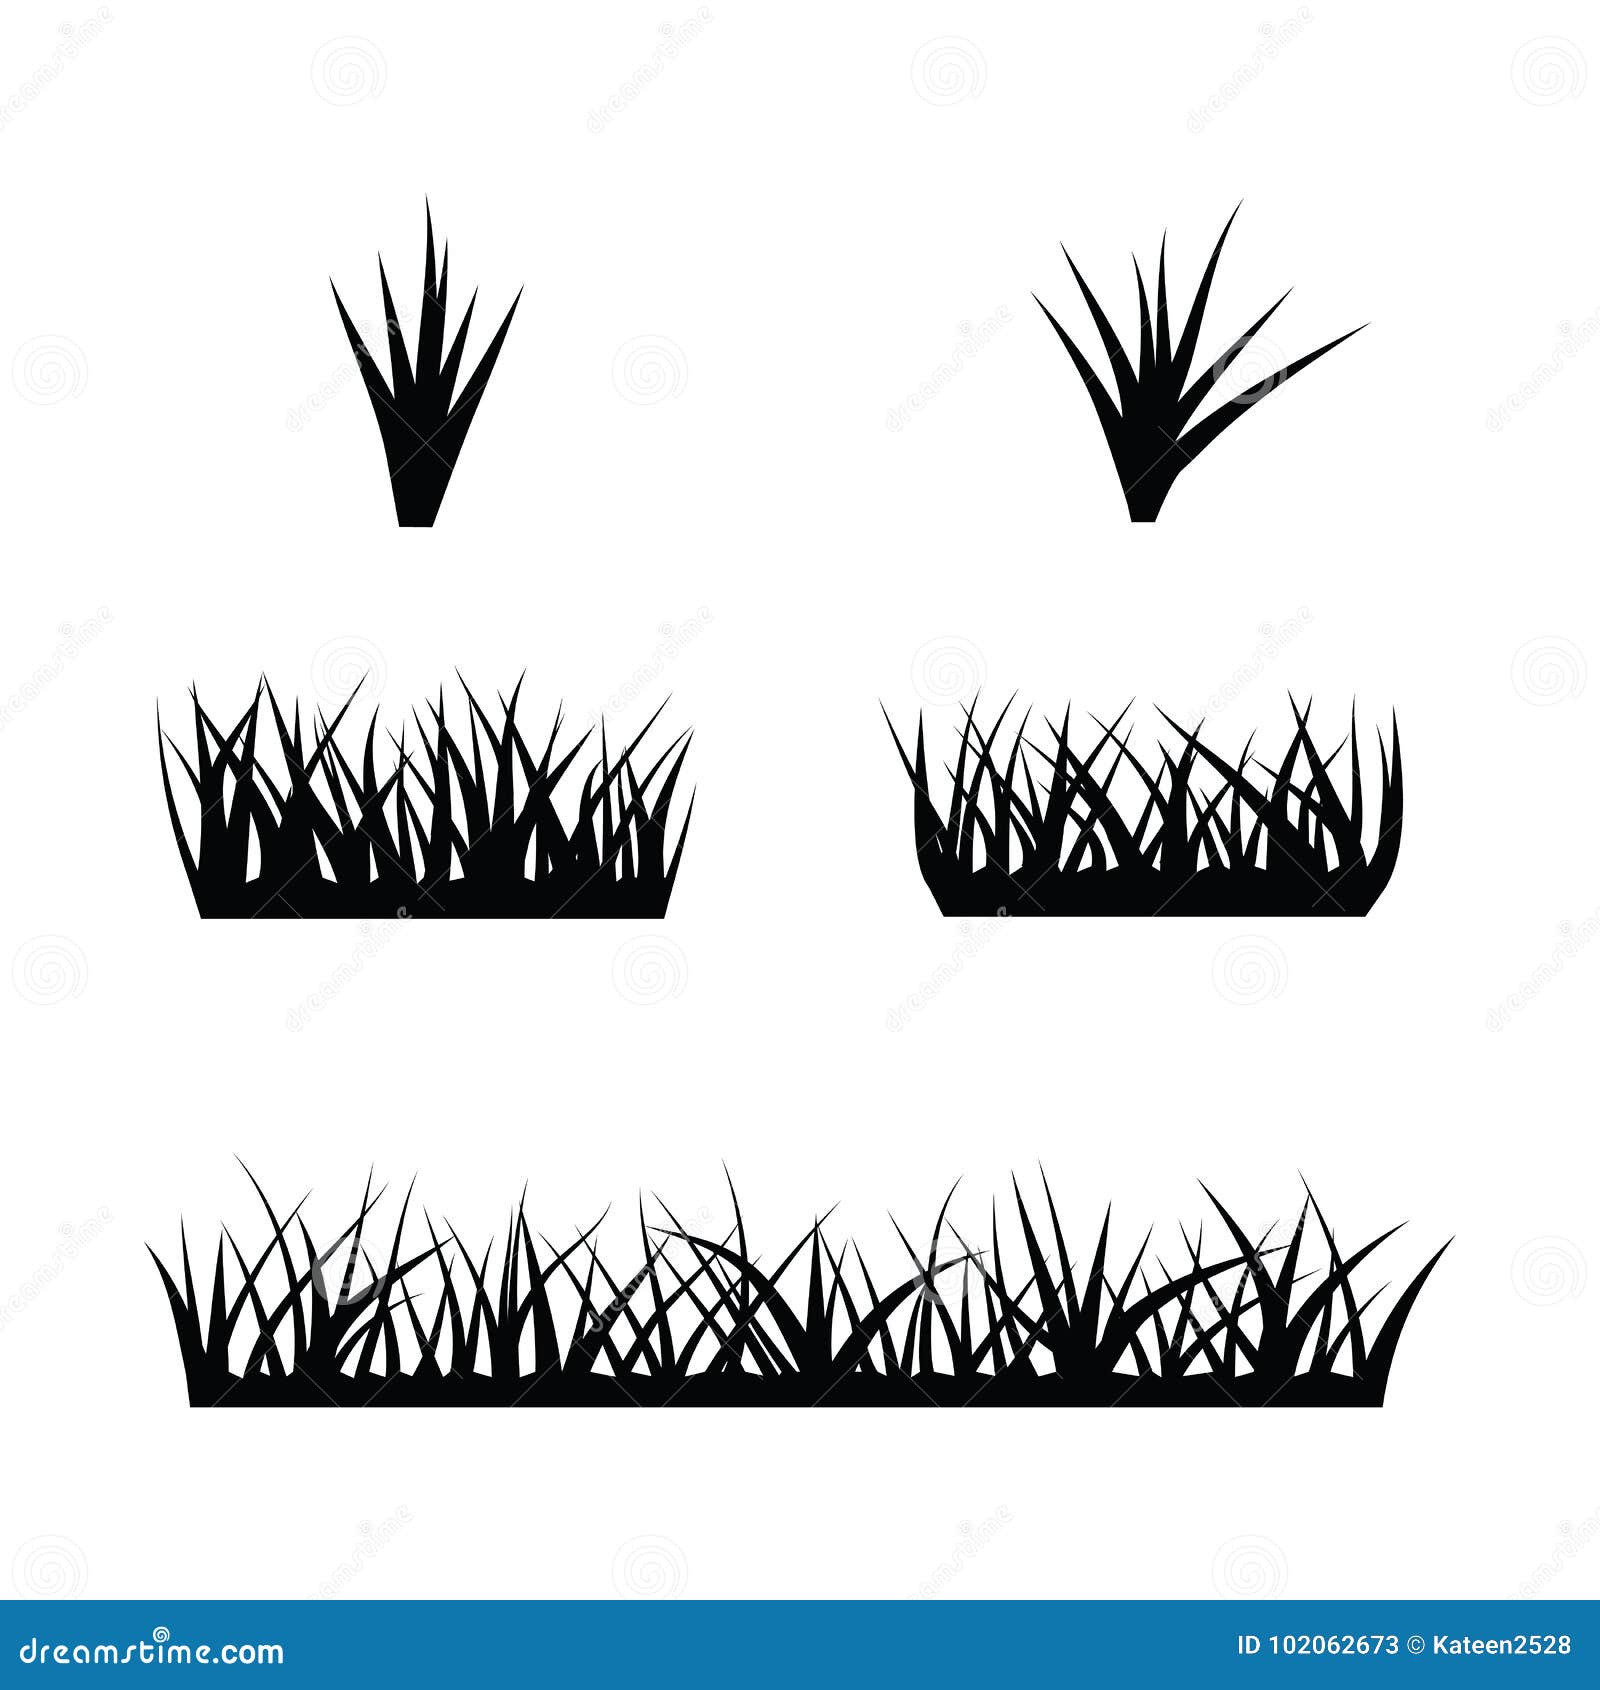 Black silhouette of grass stock vector. Illustration of nature - 102062673